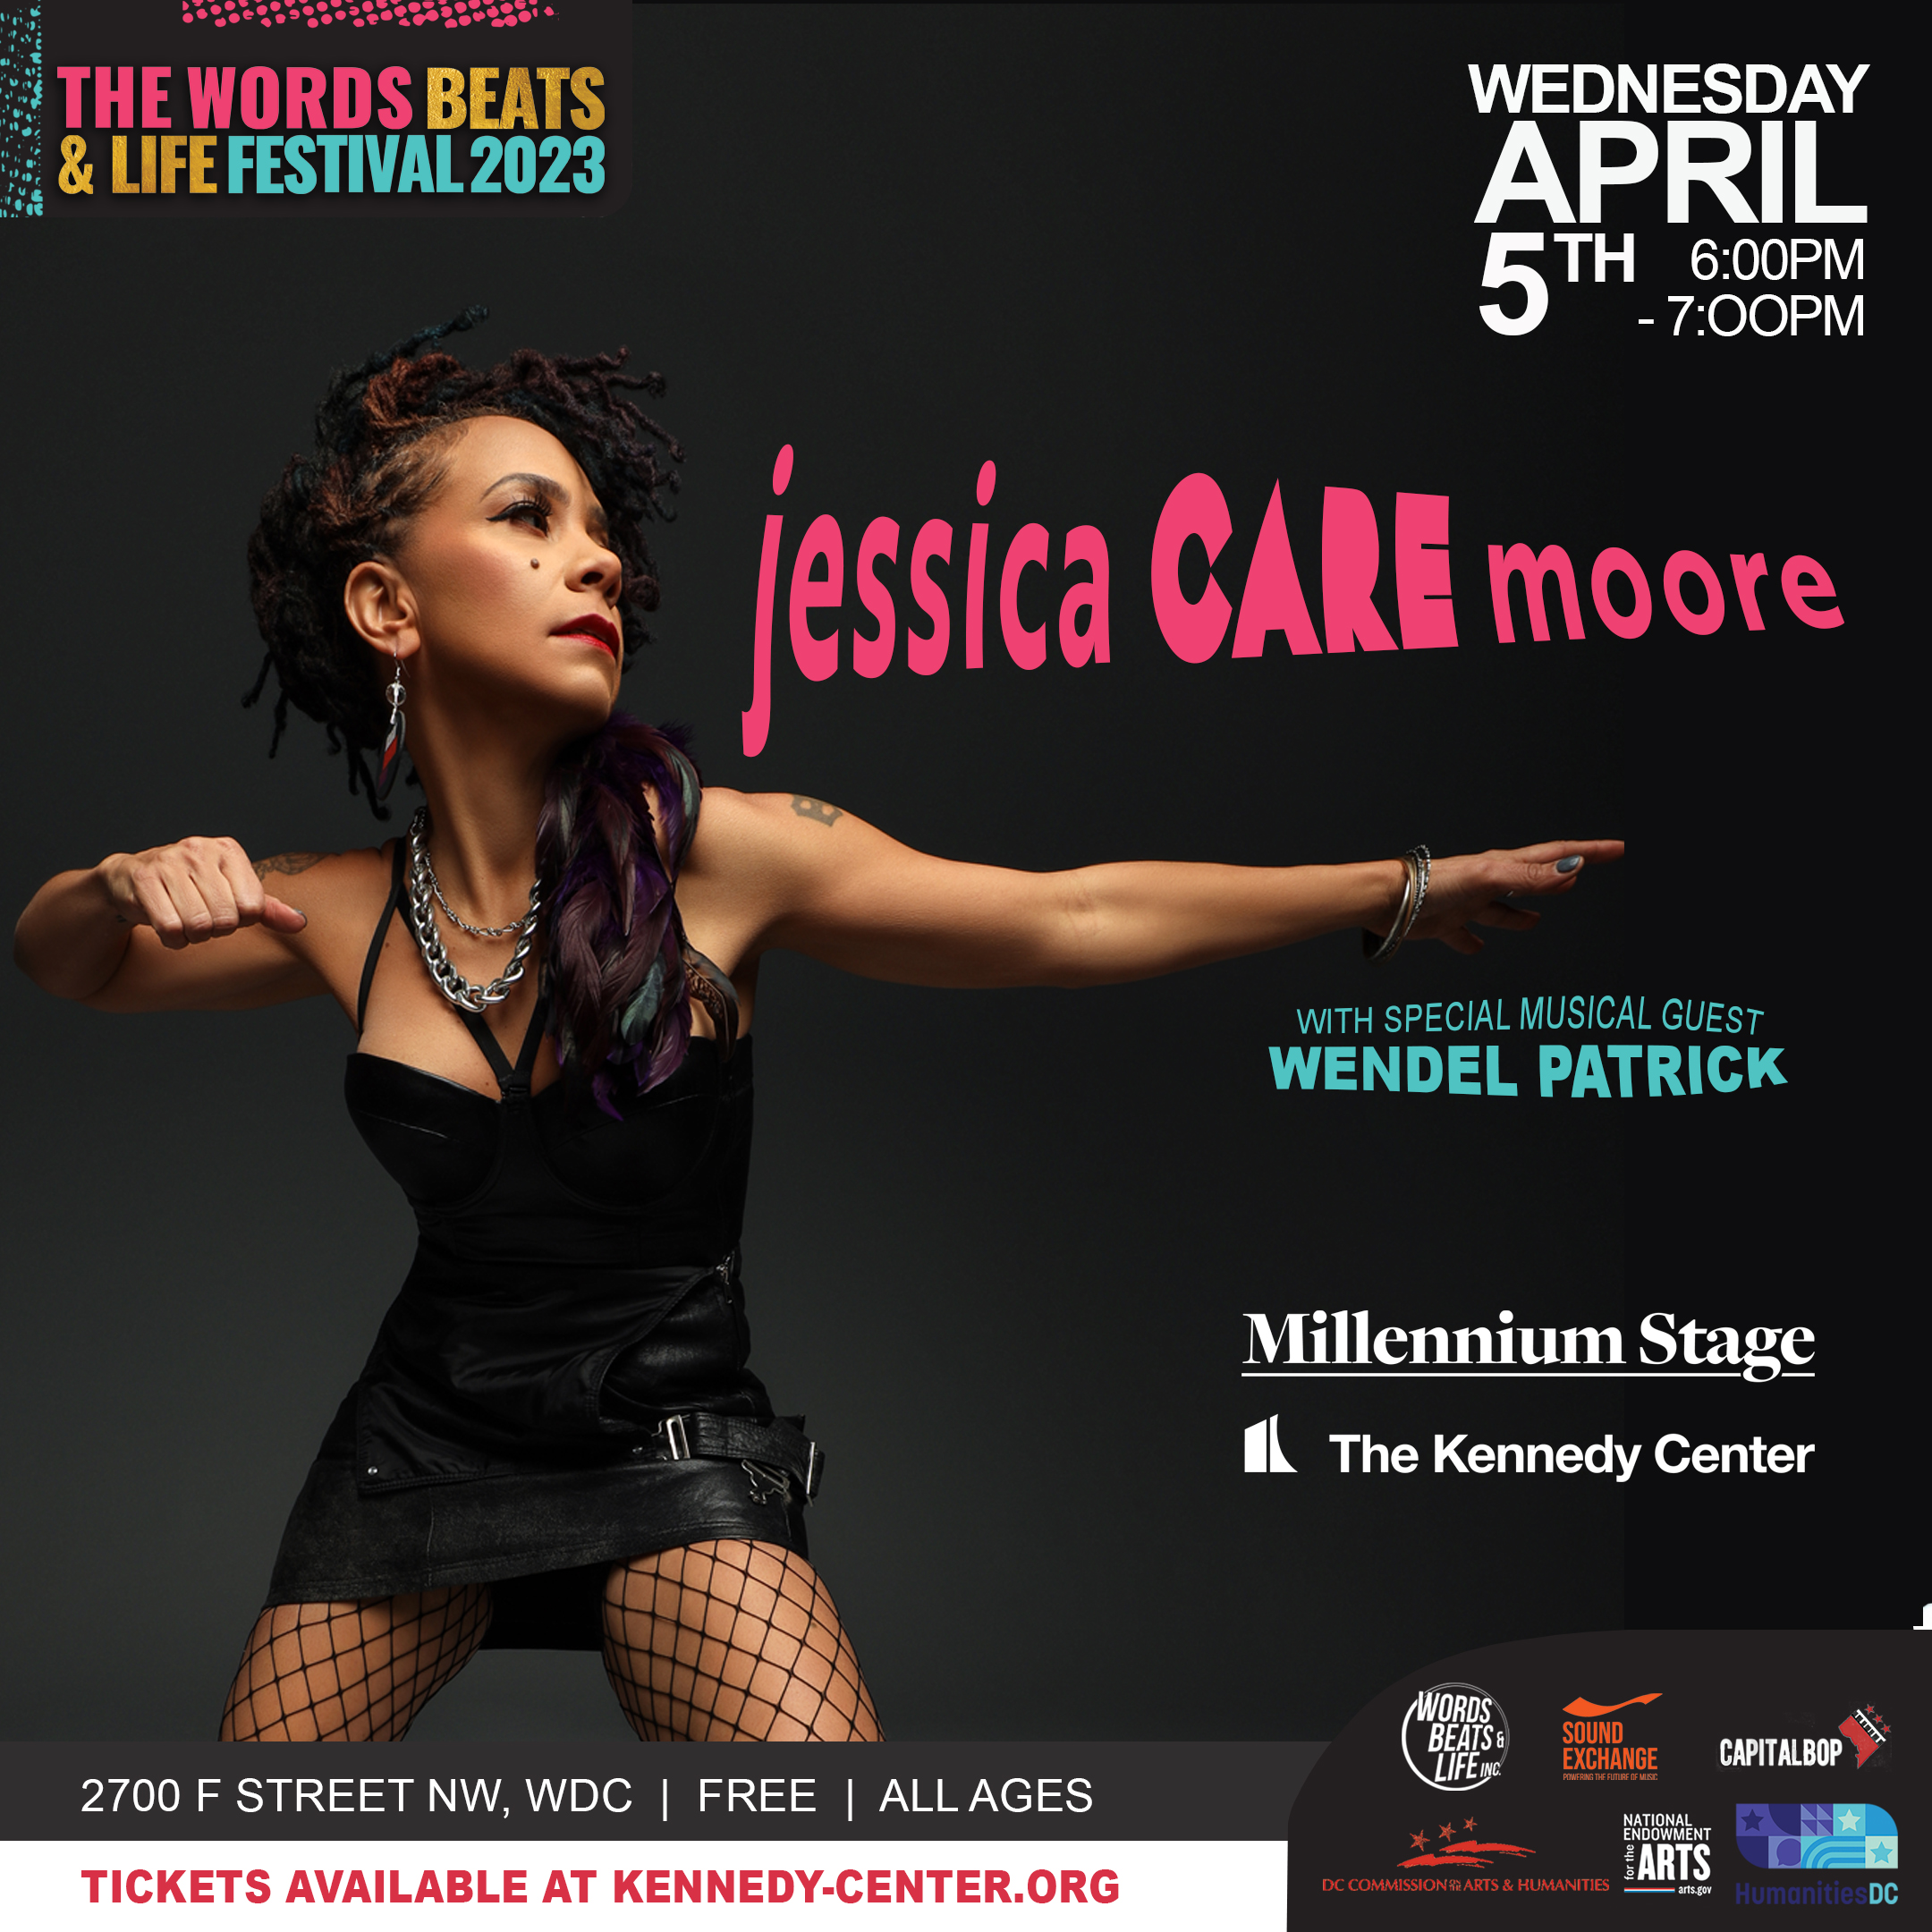 Jessica Care Moore W Wendel Patrick At Kennedy Center On Wed Apr 5th 2023 600 Pm 